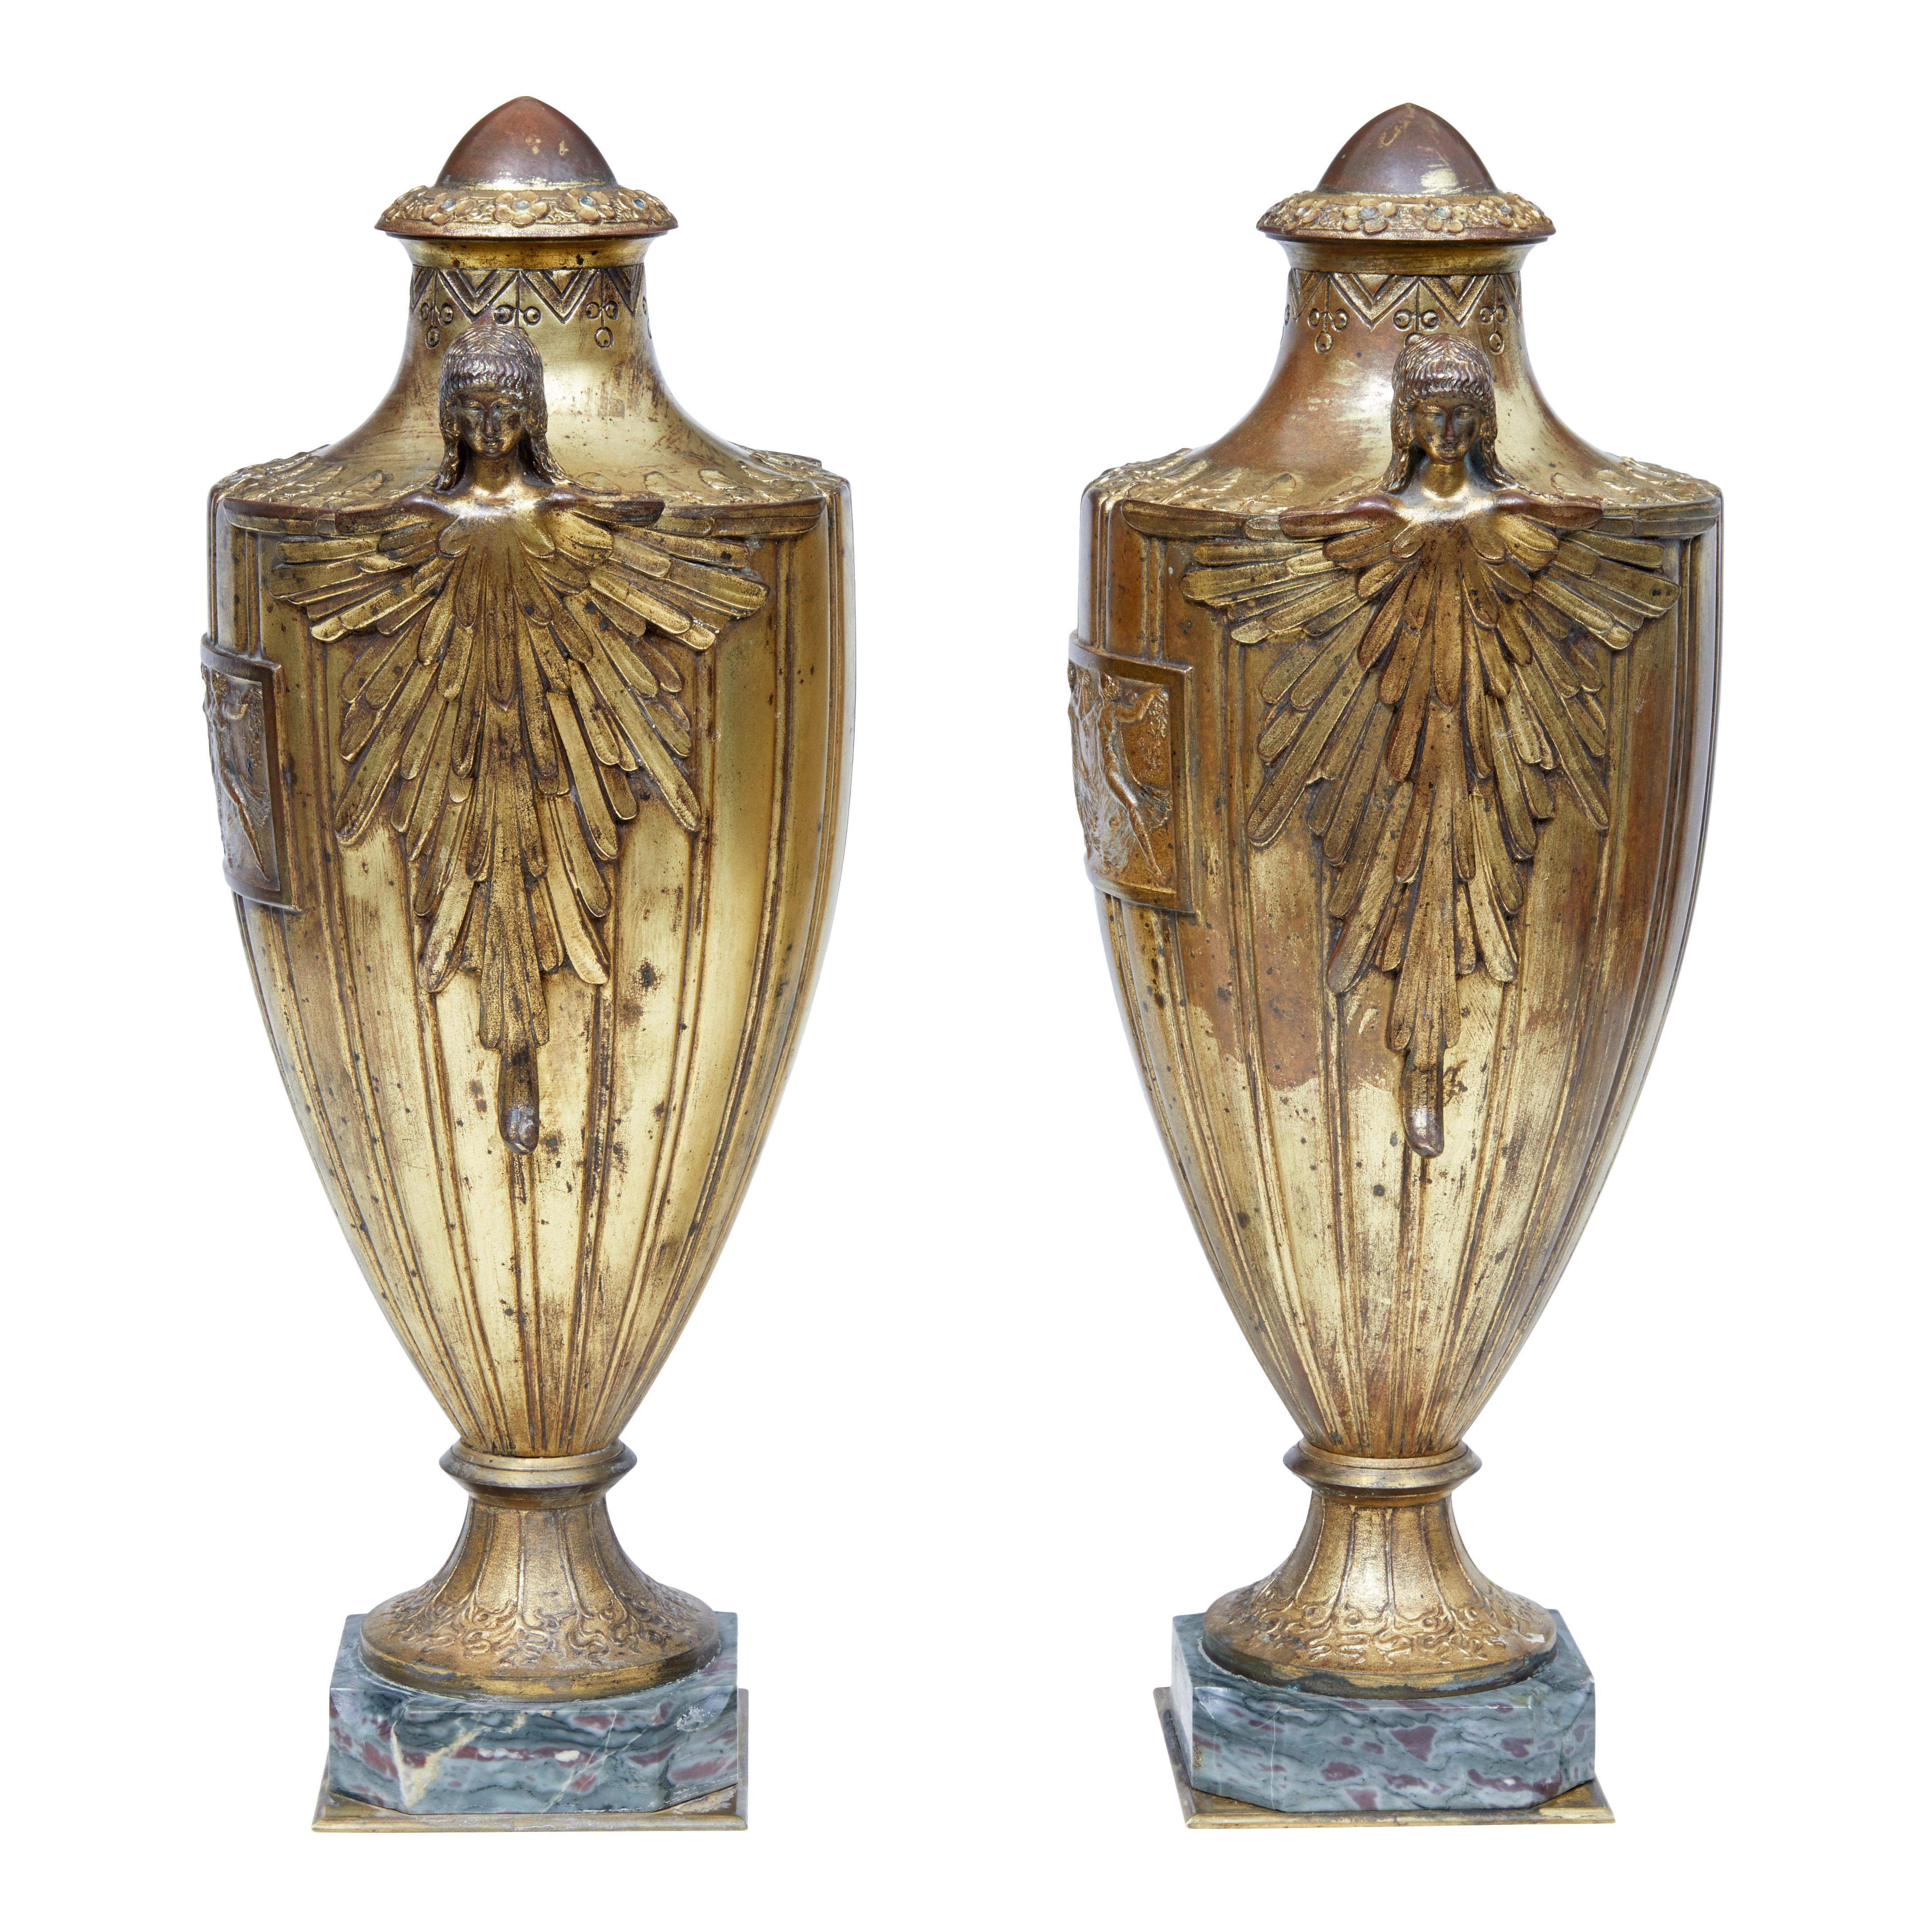 Opportunity to own a fine pair of period art deco urns, circa 1920.

Solid bronze with channeled edge which flows down to the base. Beaked top finial surrounded by cast flowers with central glass detailing. Winged female figures on both sides. On